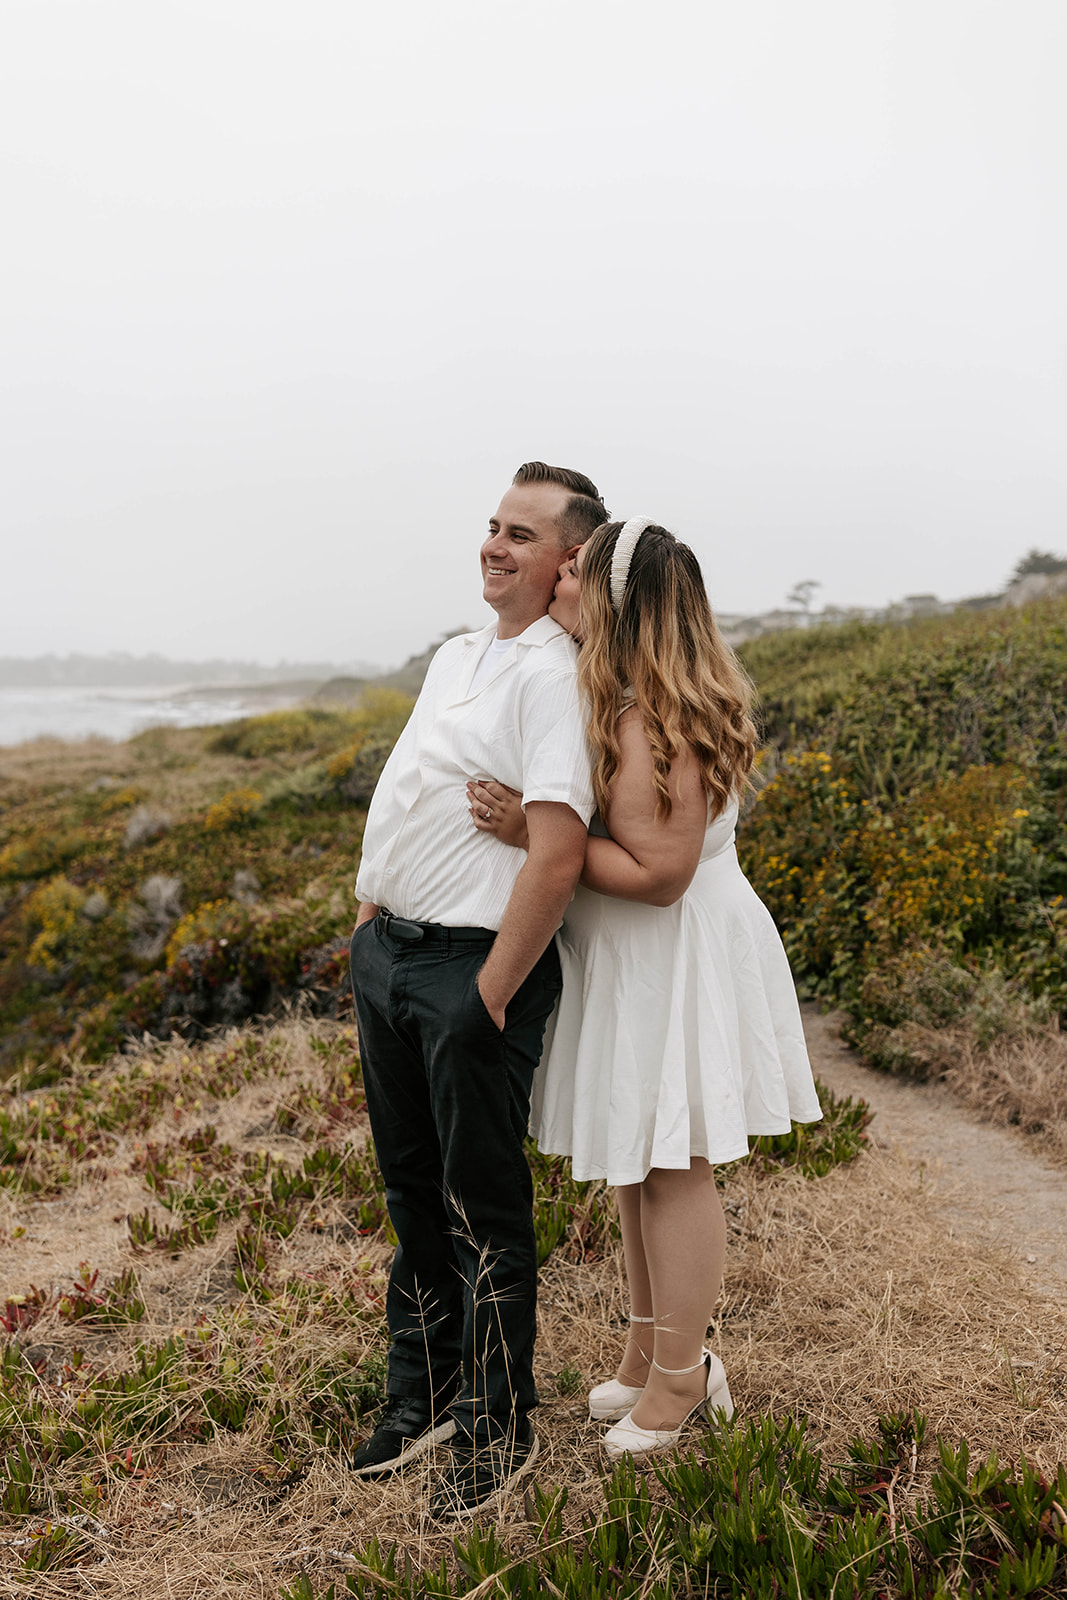 carmel by the sea carmel beach california engagement with dog photoshoot outfit ideas southern california photographer